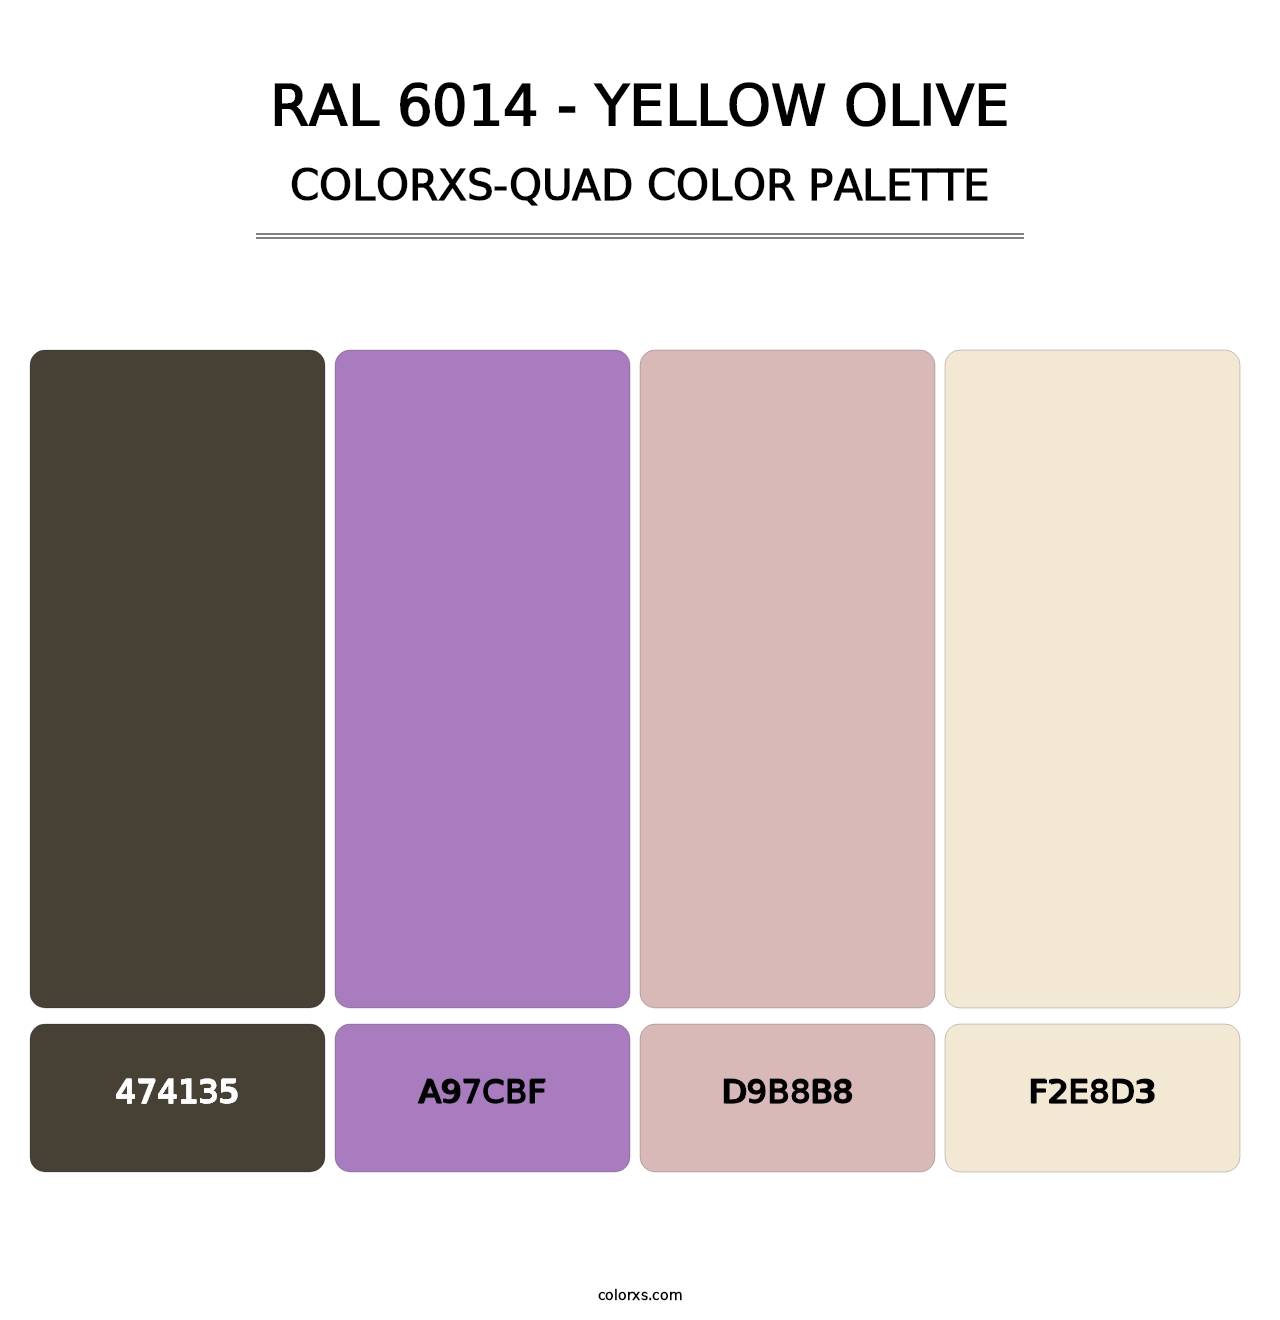 RAL 6014 - Yellow Olive - Colorxs Quad Palette